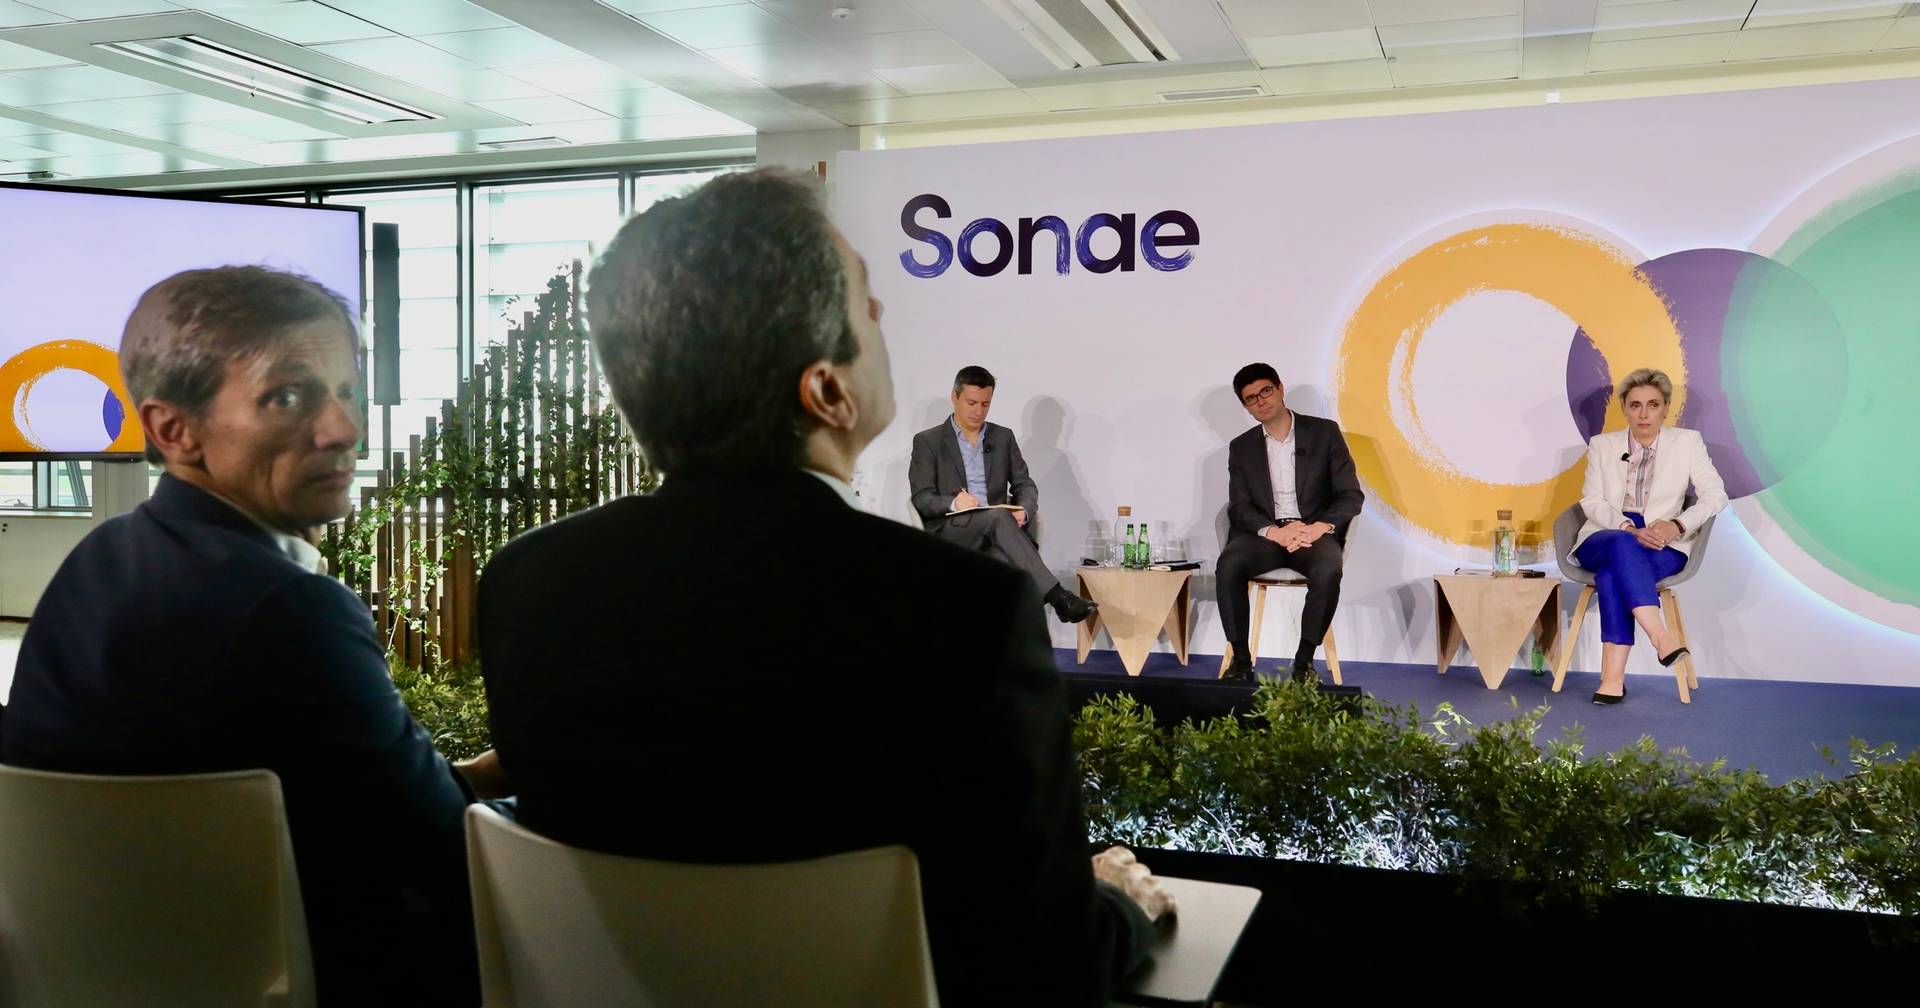 Sonae has completed the sale of its stake in the sporting goods business with a capital gain of €168 million